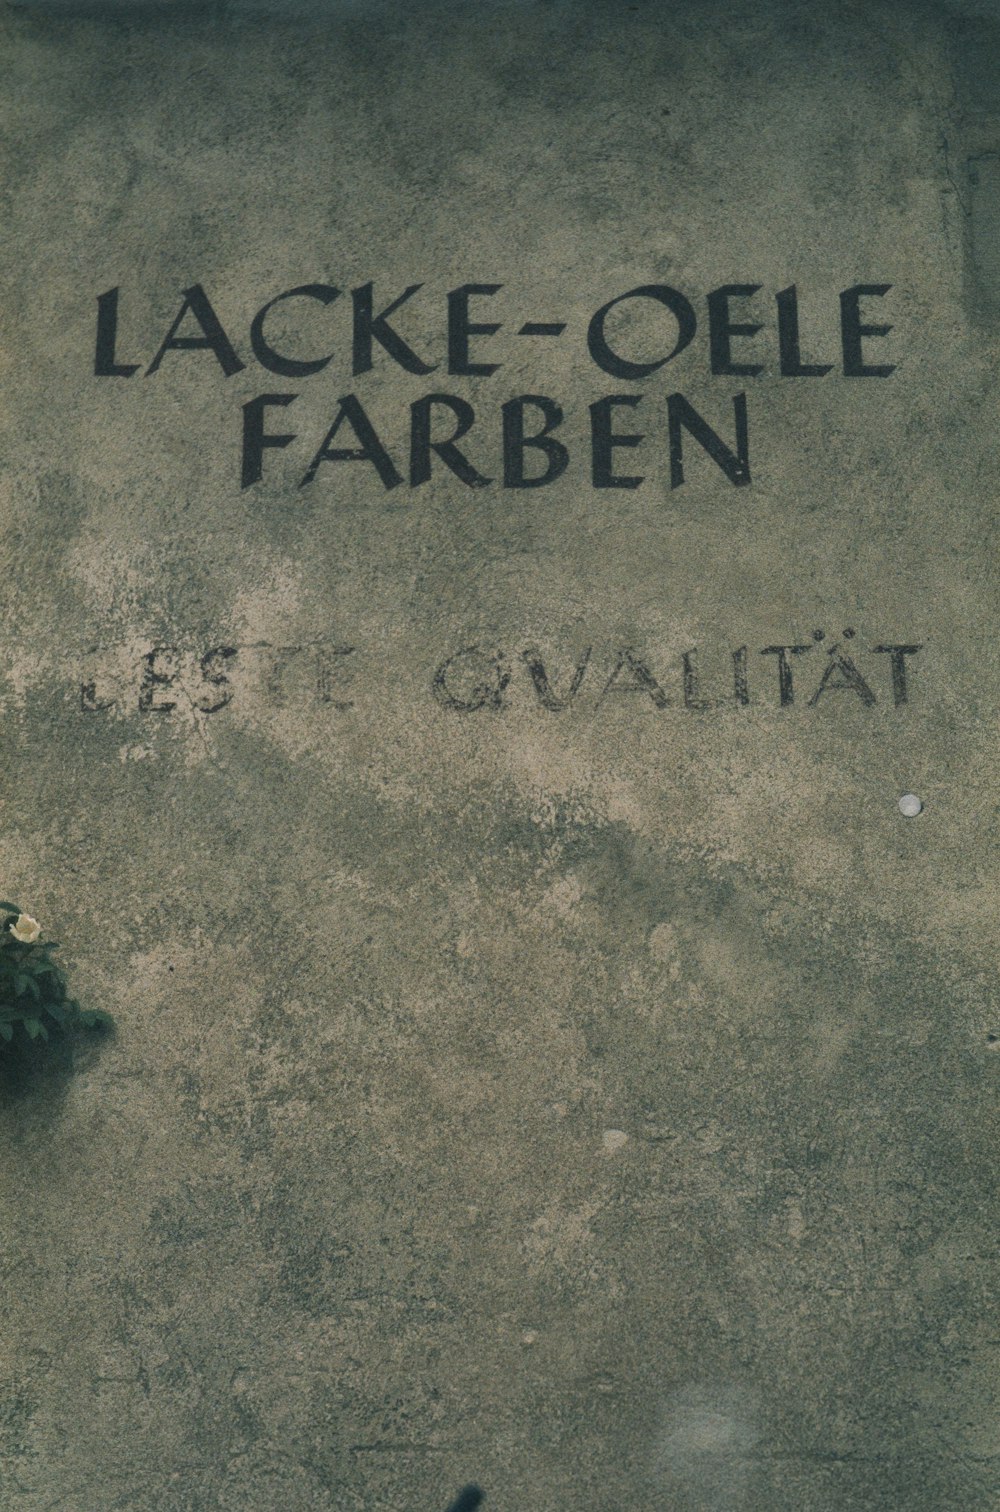 a sign on the side of a building that says lacke - oele far